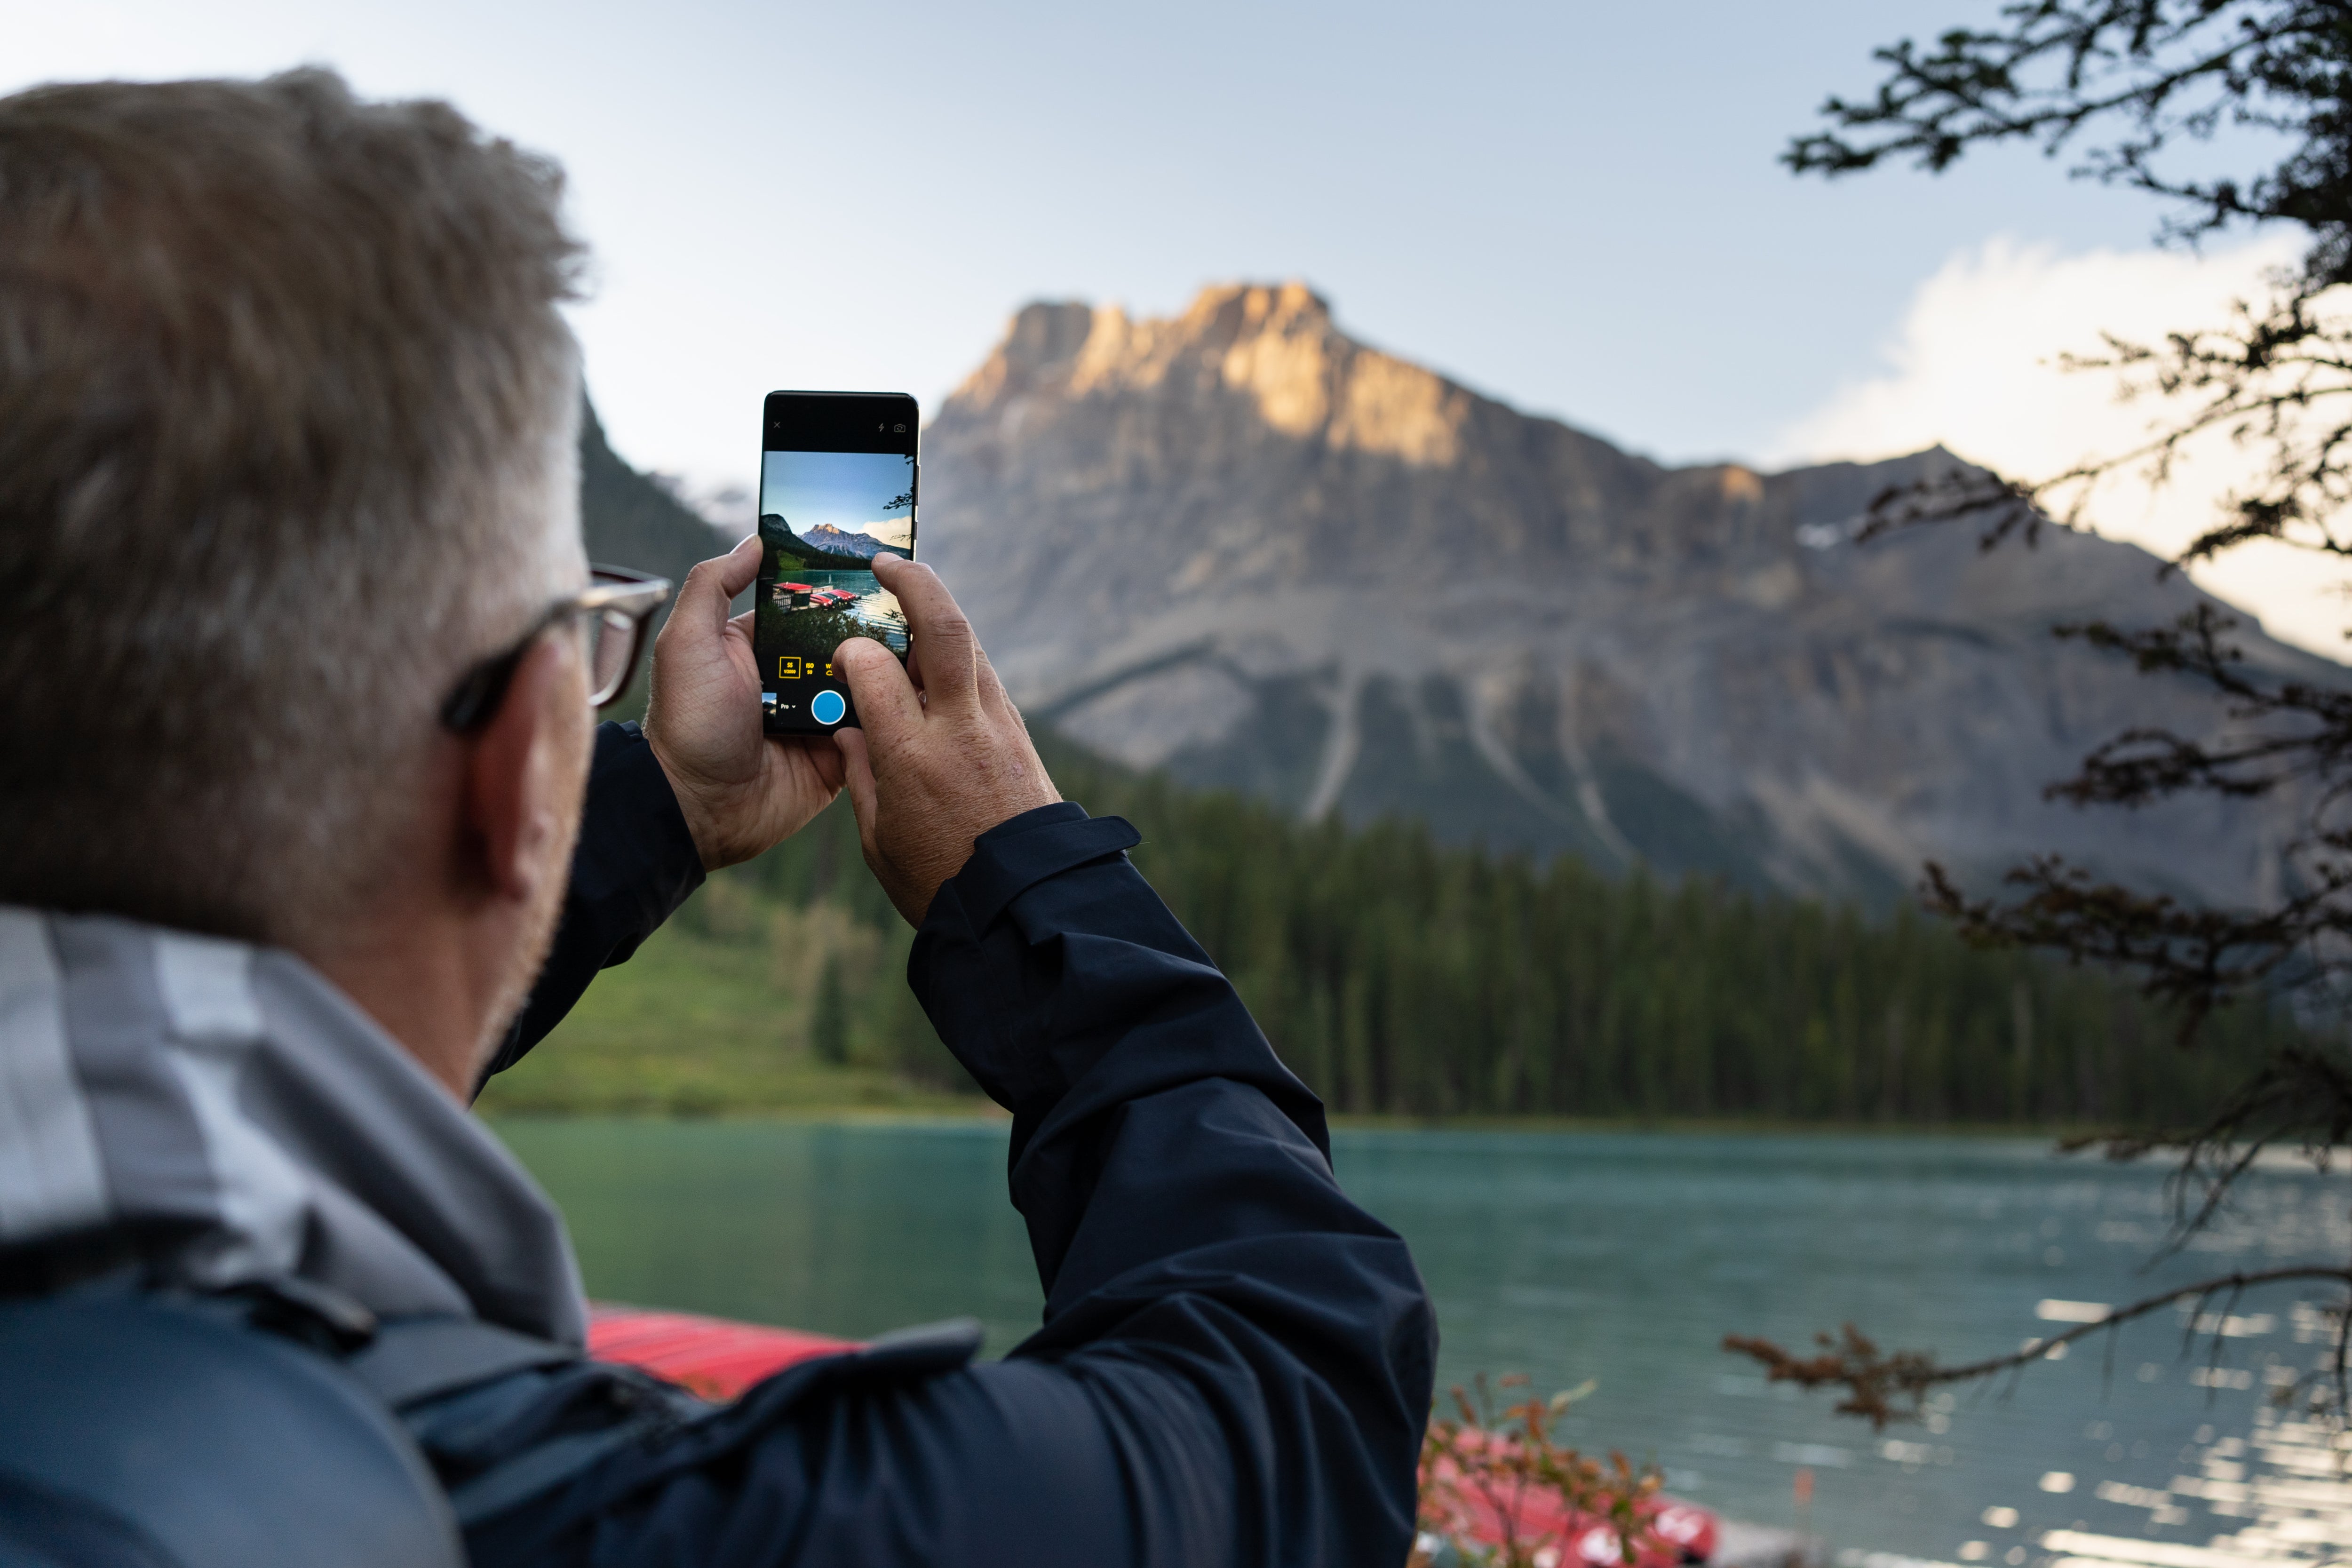 Man Taking a Photo of a Canadian Landscape Using His Smartphone